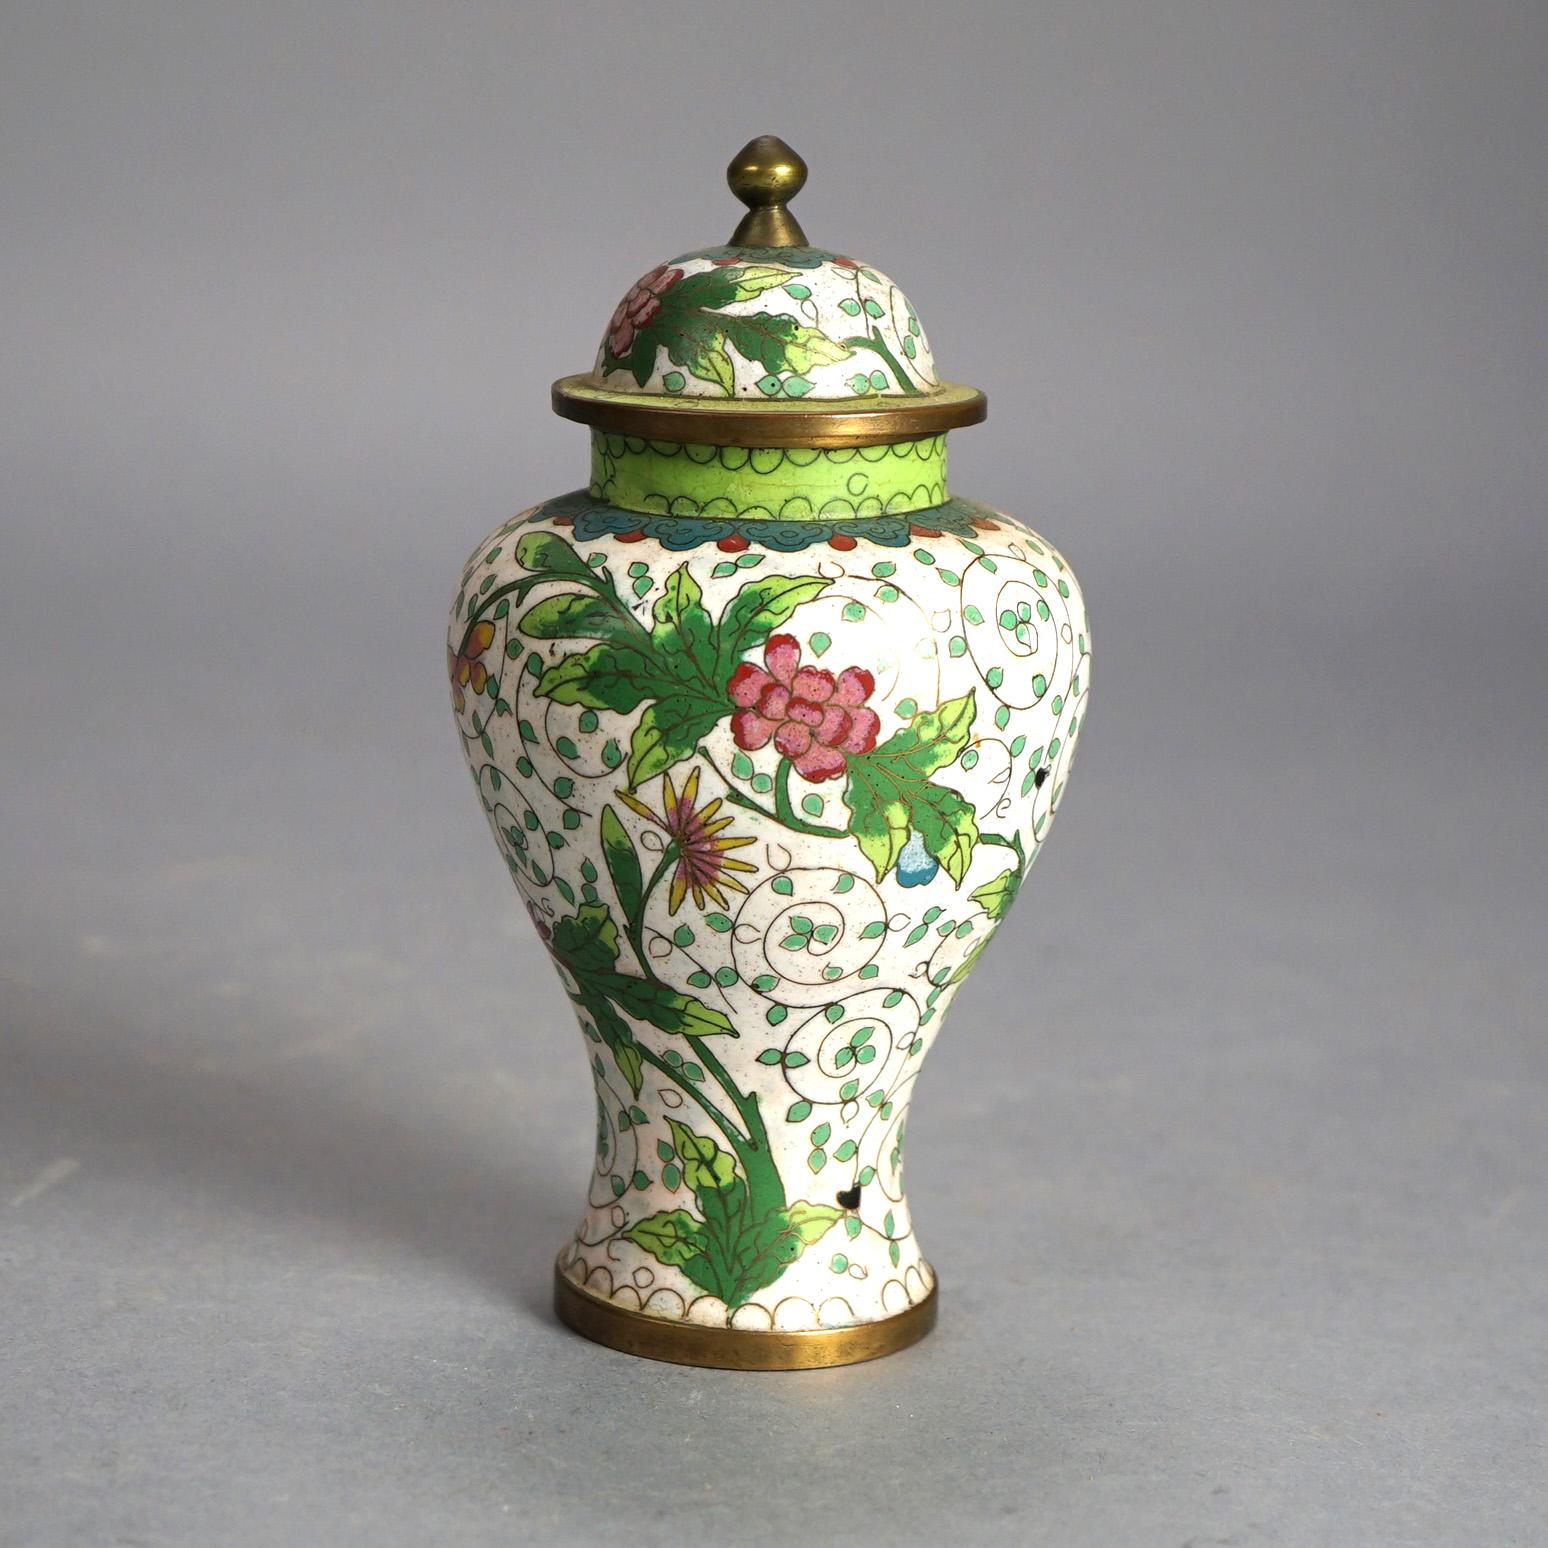 20th Century Antique Chinese Bronze Cloisonne Enameled Lidded Urn with Flowers C1920 For Sale